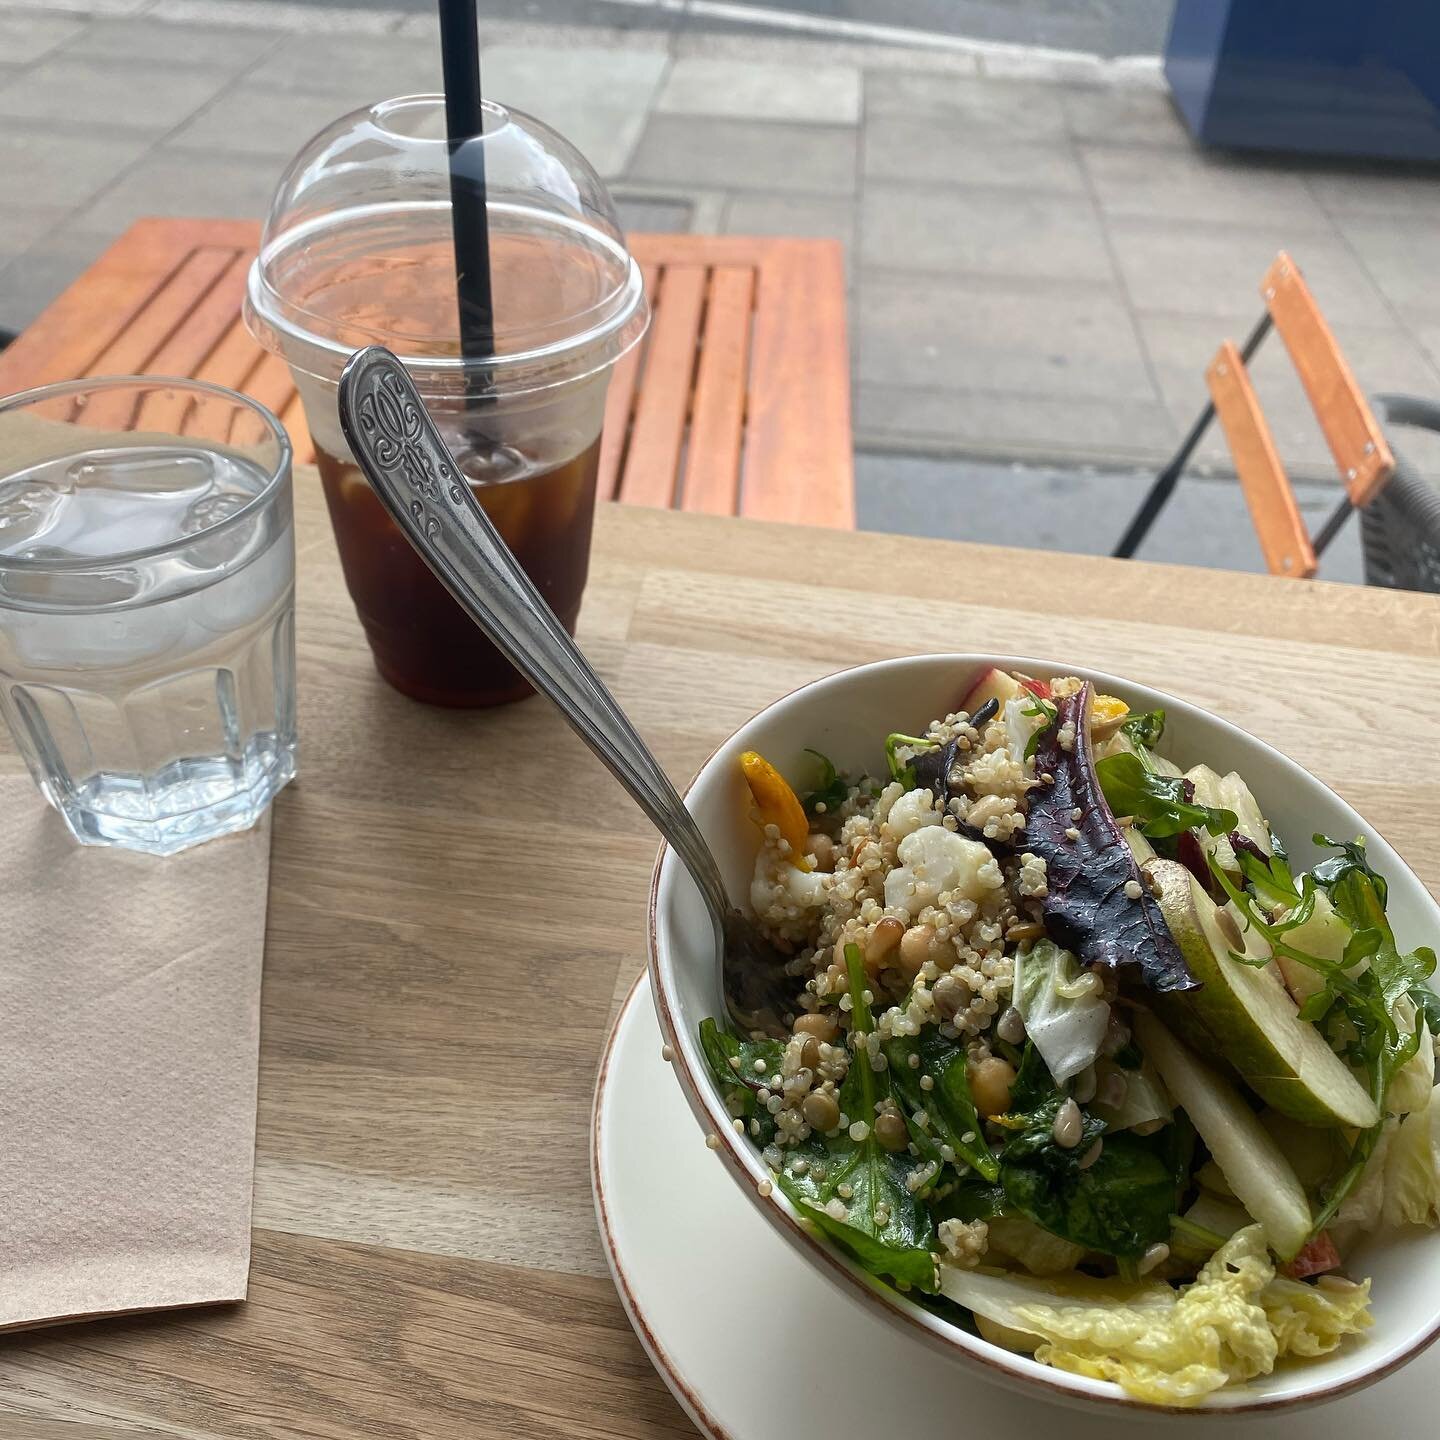 Today&rsquo;s day off was very much needed and felt SO thankful for a gorgeous coffee and salad treat from @neighbourhoodorganic 🥰

#thisismylondon #londonlife #classicalmusic #classicalmusicians #classicalmusician #clarinet #clarinette #clarinete #